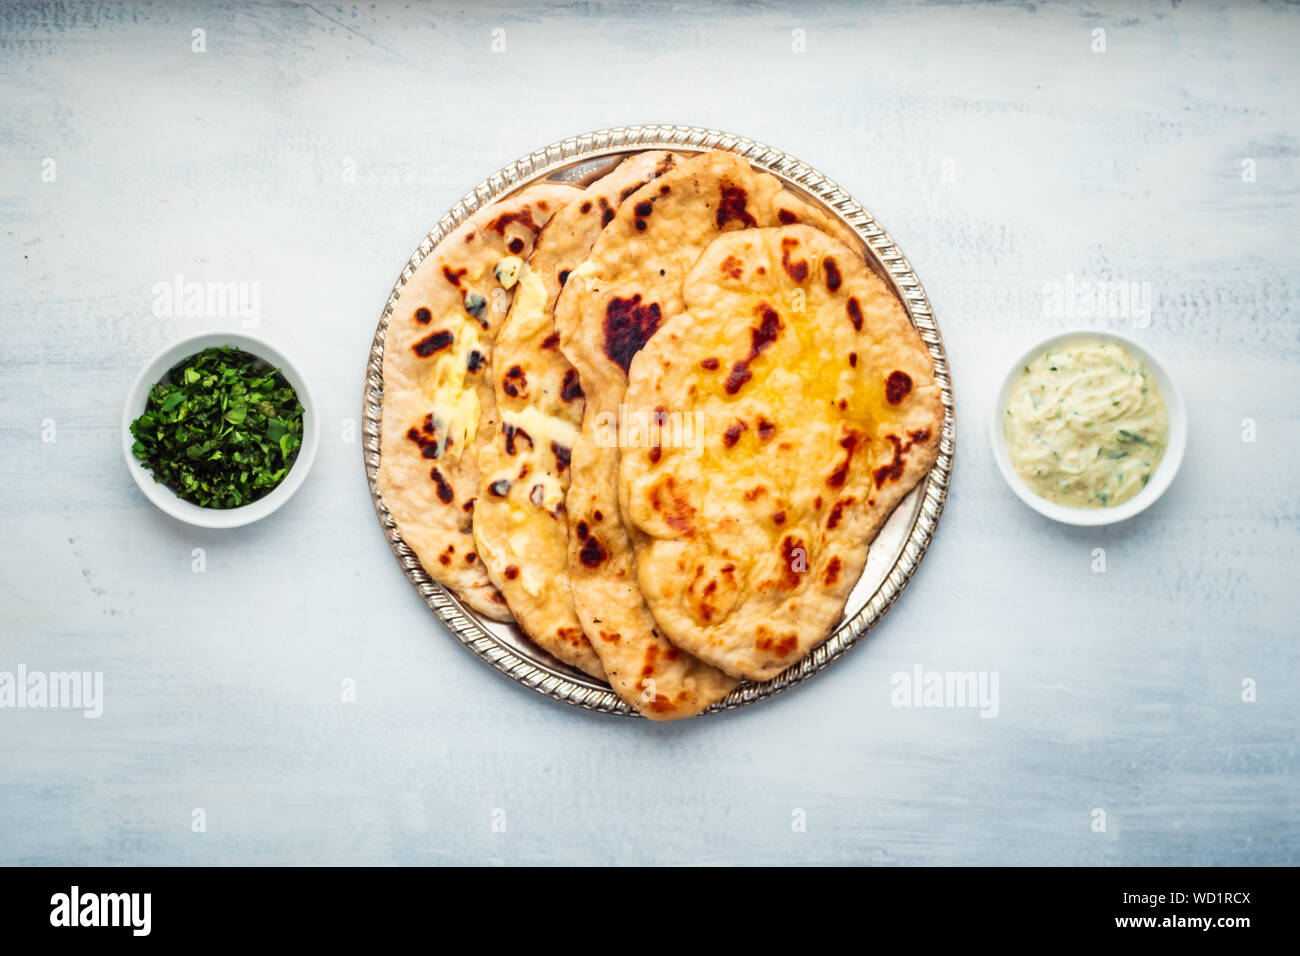 Indian Food: Naan Bread Dish with Butter, Served in a Rustic Metal Tray with Coriander and Raita. Stock Photo